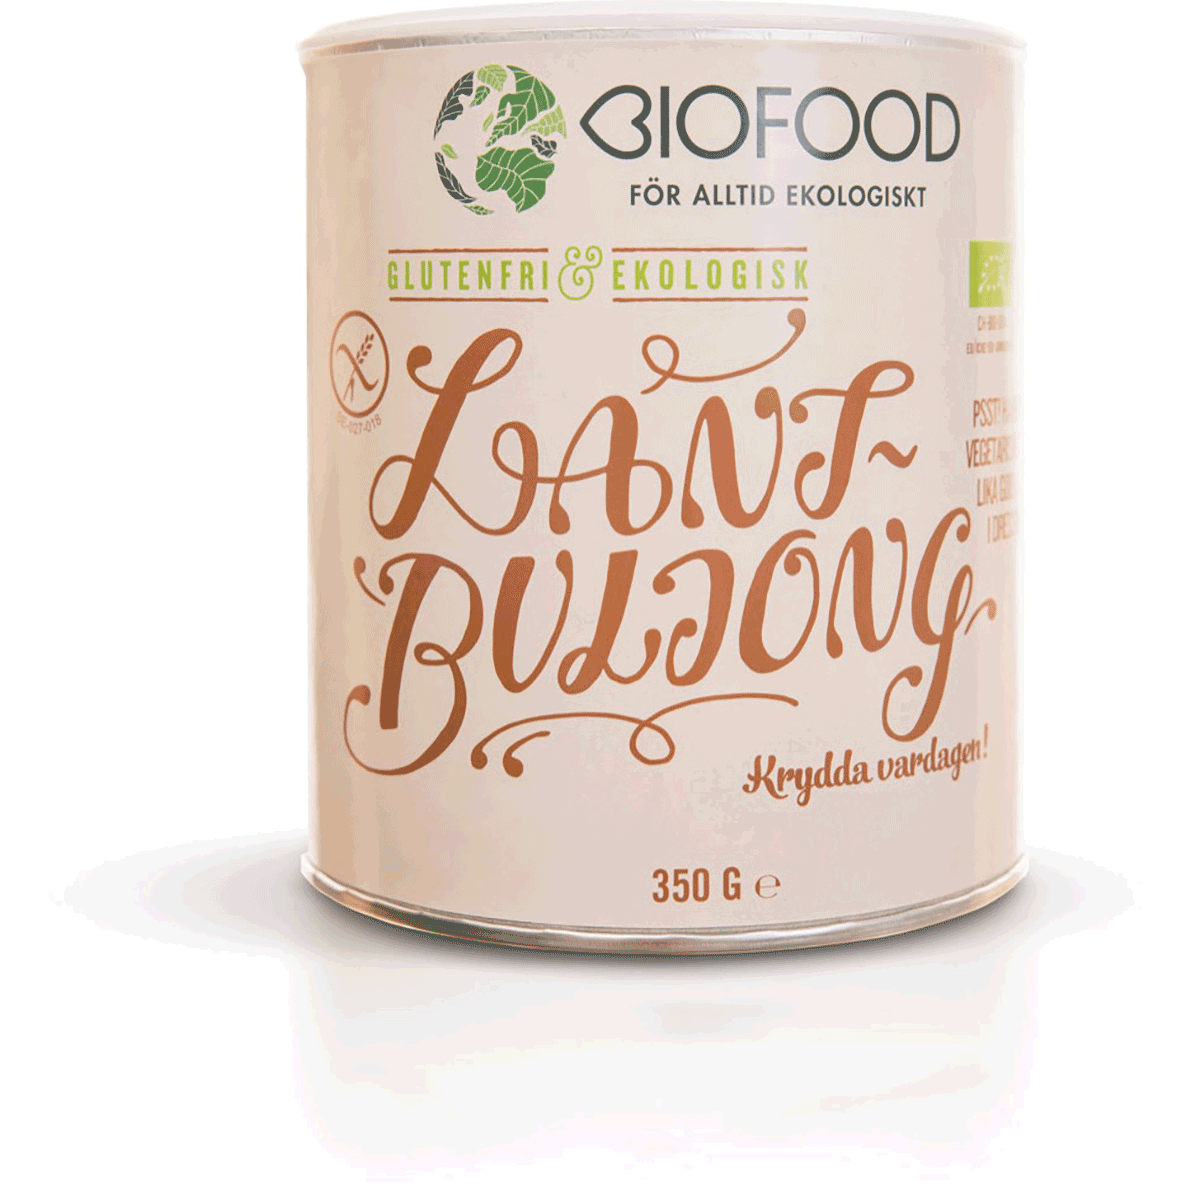 Country broth from Biofood